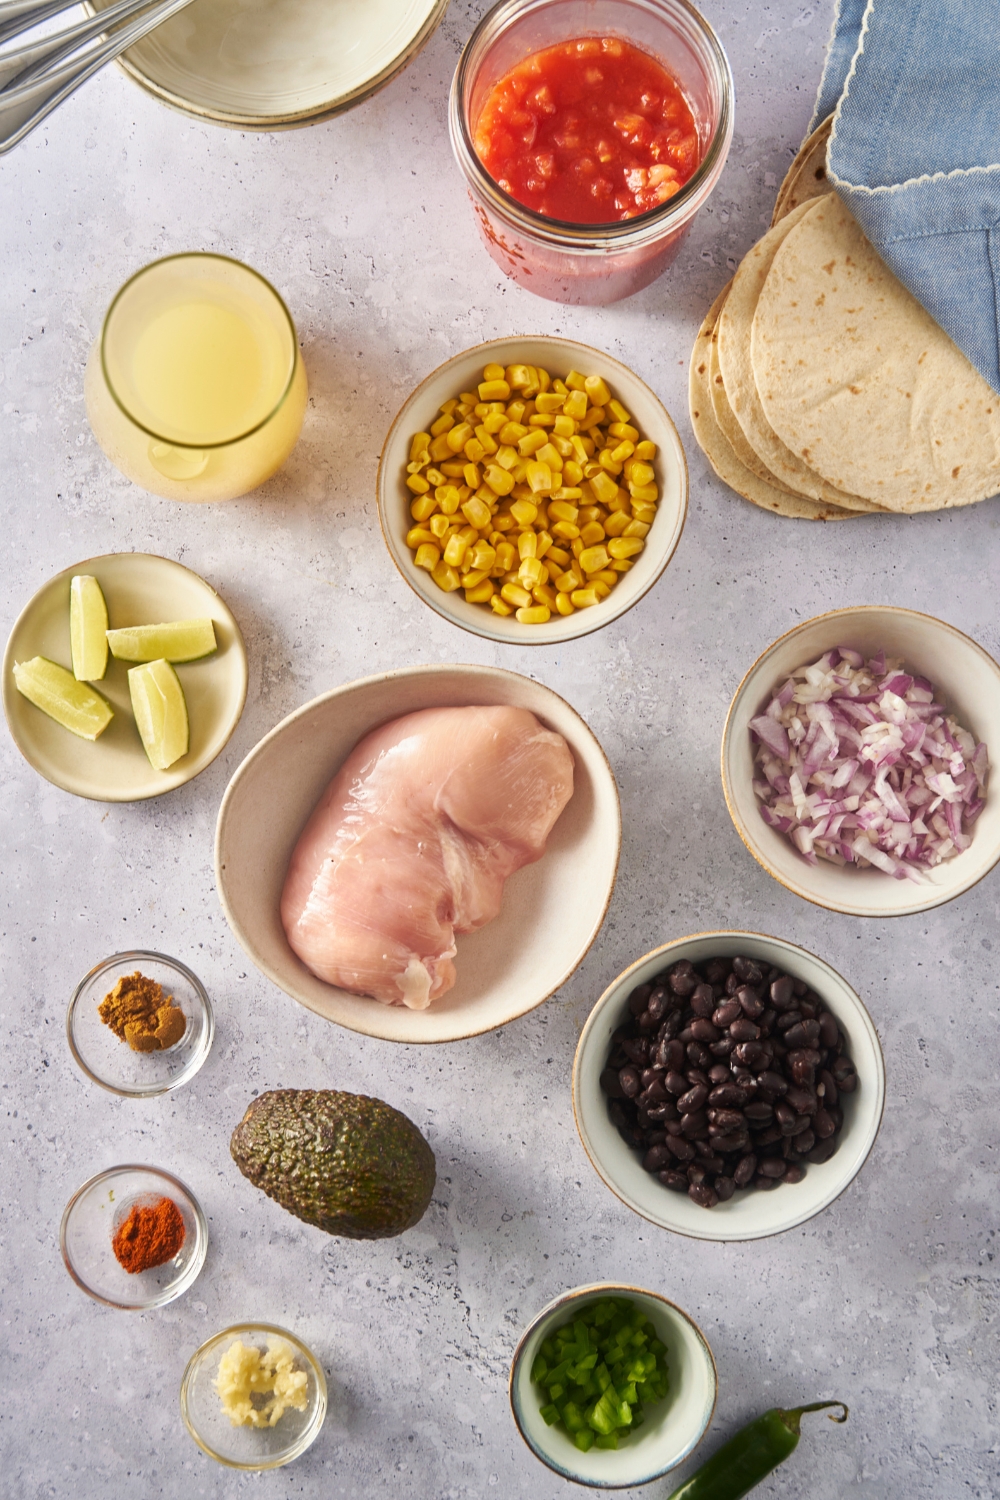 An assortment of ingredients including bowls of raw chicken, diced red onion, corn, peppers, spices, lime wedges, and black beans.